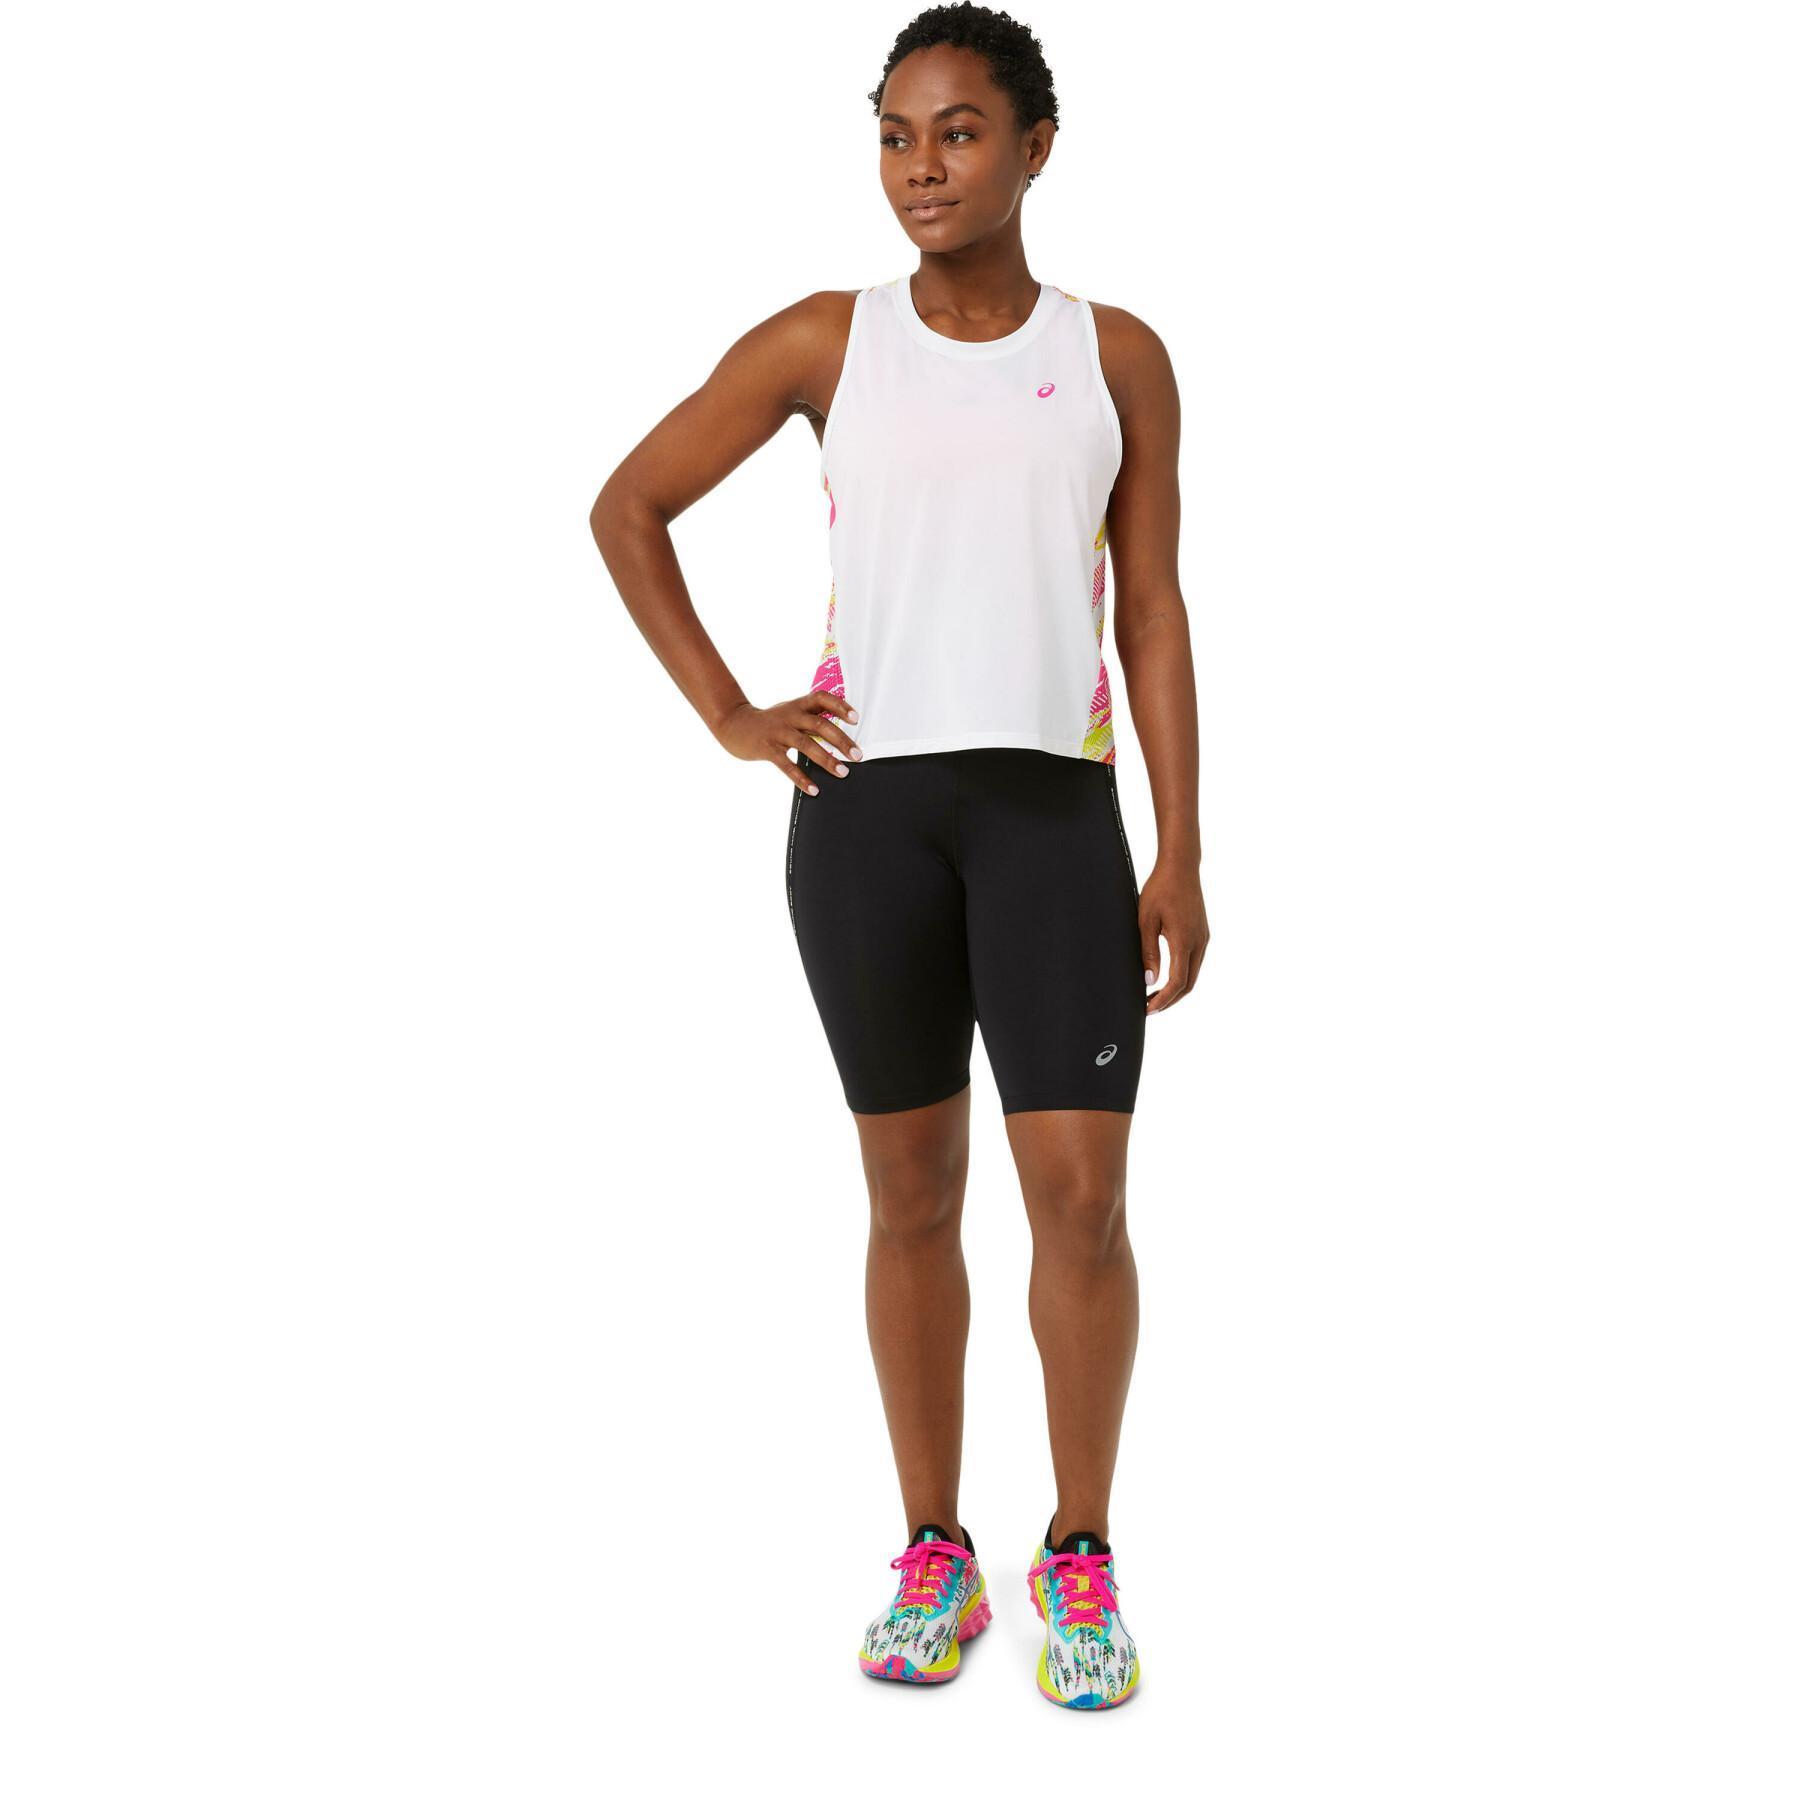 Women's tank top Asics Color Injection